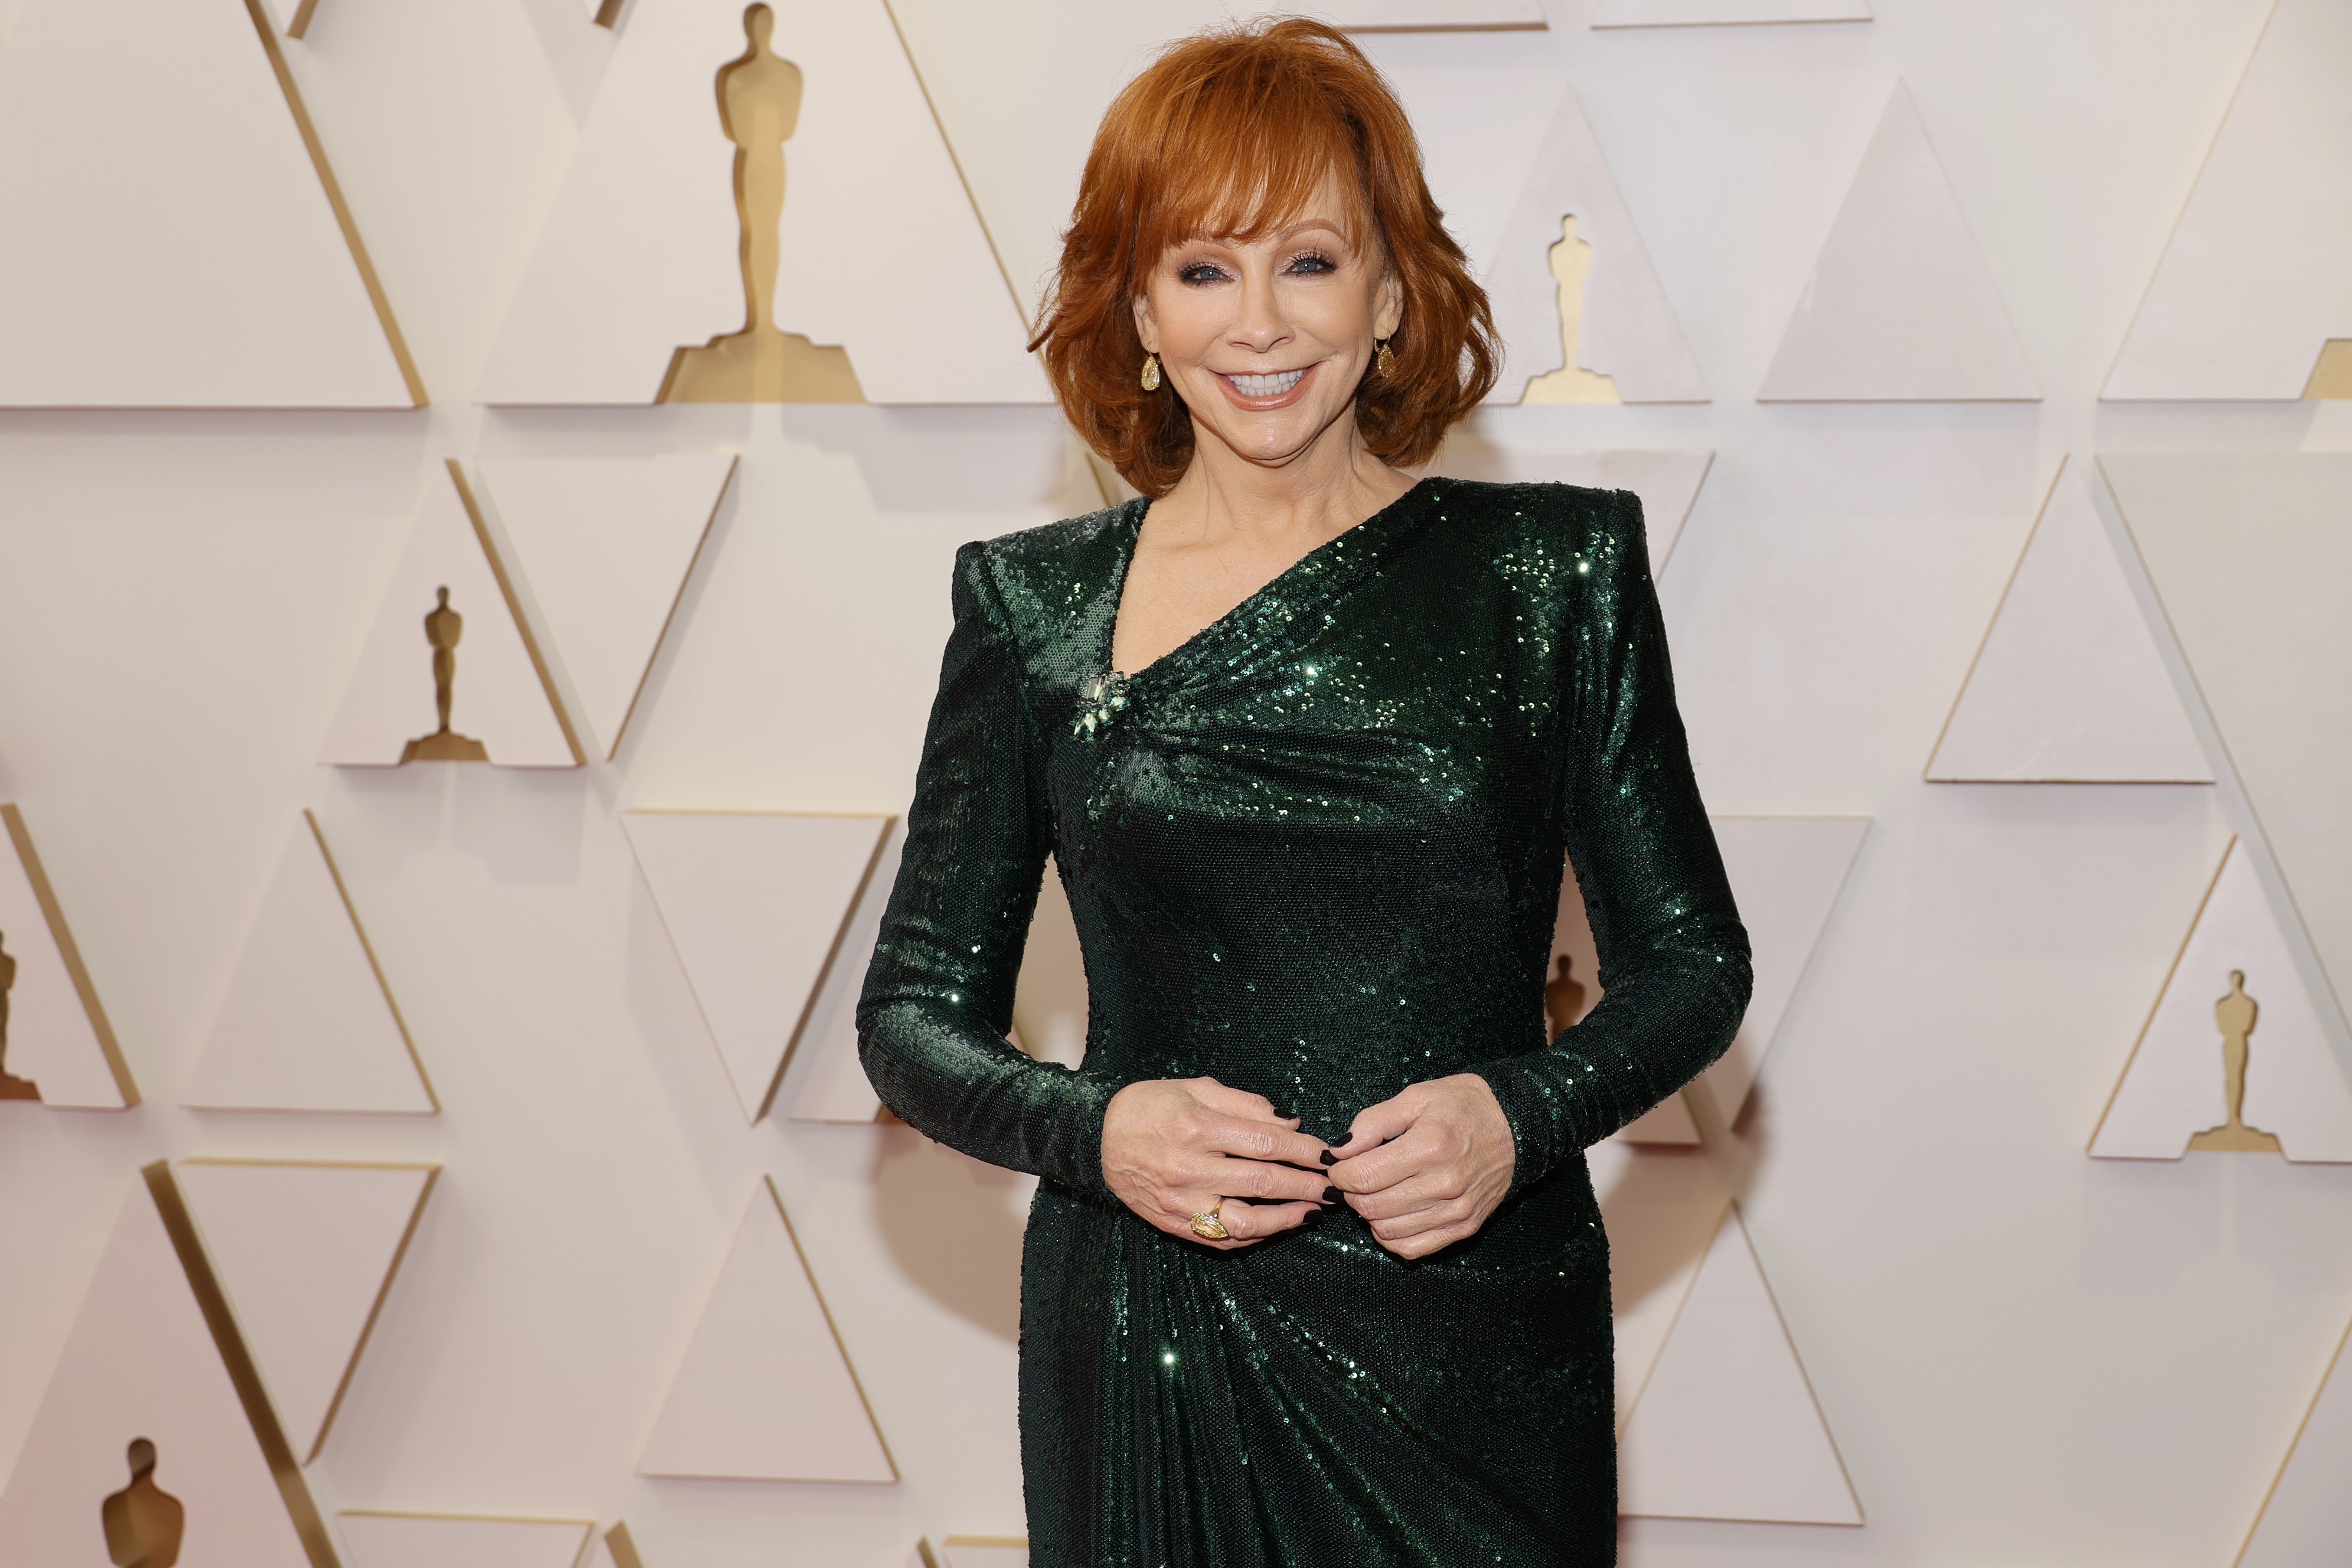 'Big Sky' actor Reba McEntire posing for cameras at the 94th Annual Academy Awards